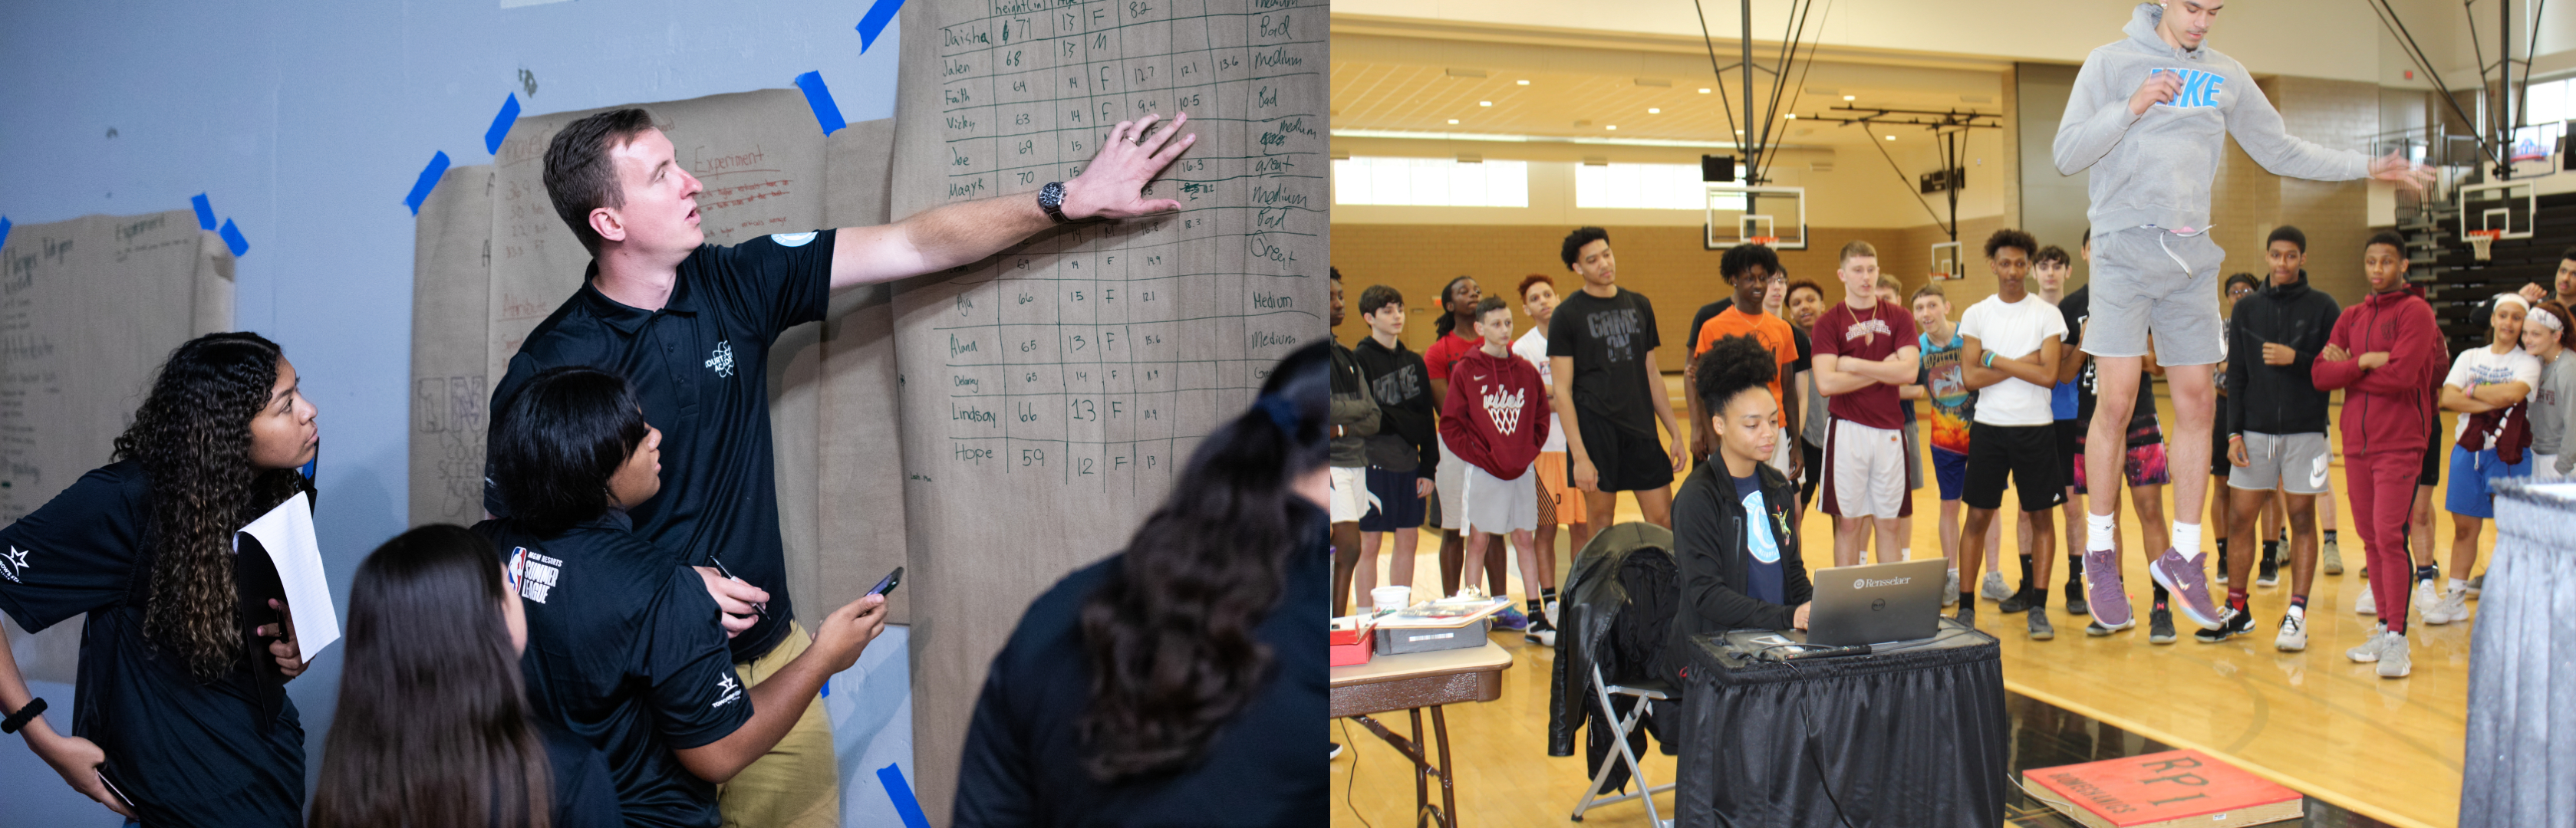 on the left, a person discusses numbers on a chart to a group of students, on the right, students on a basketball court watch as a person jumps onto a box while another person looks at a laptop screen